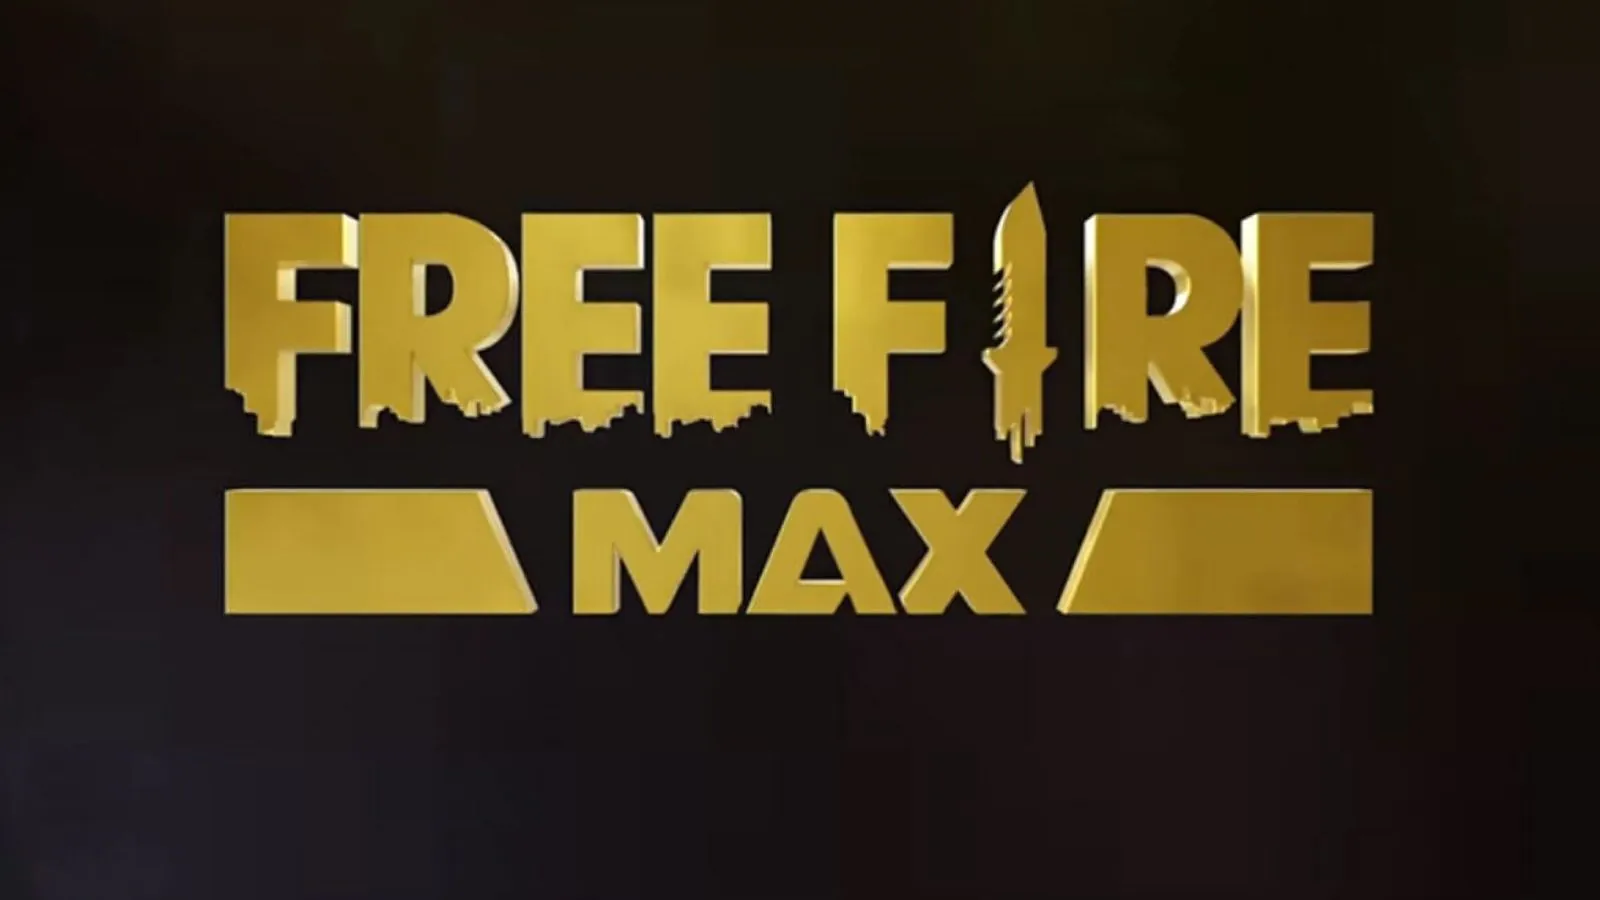 Play free fire max